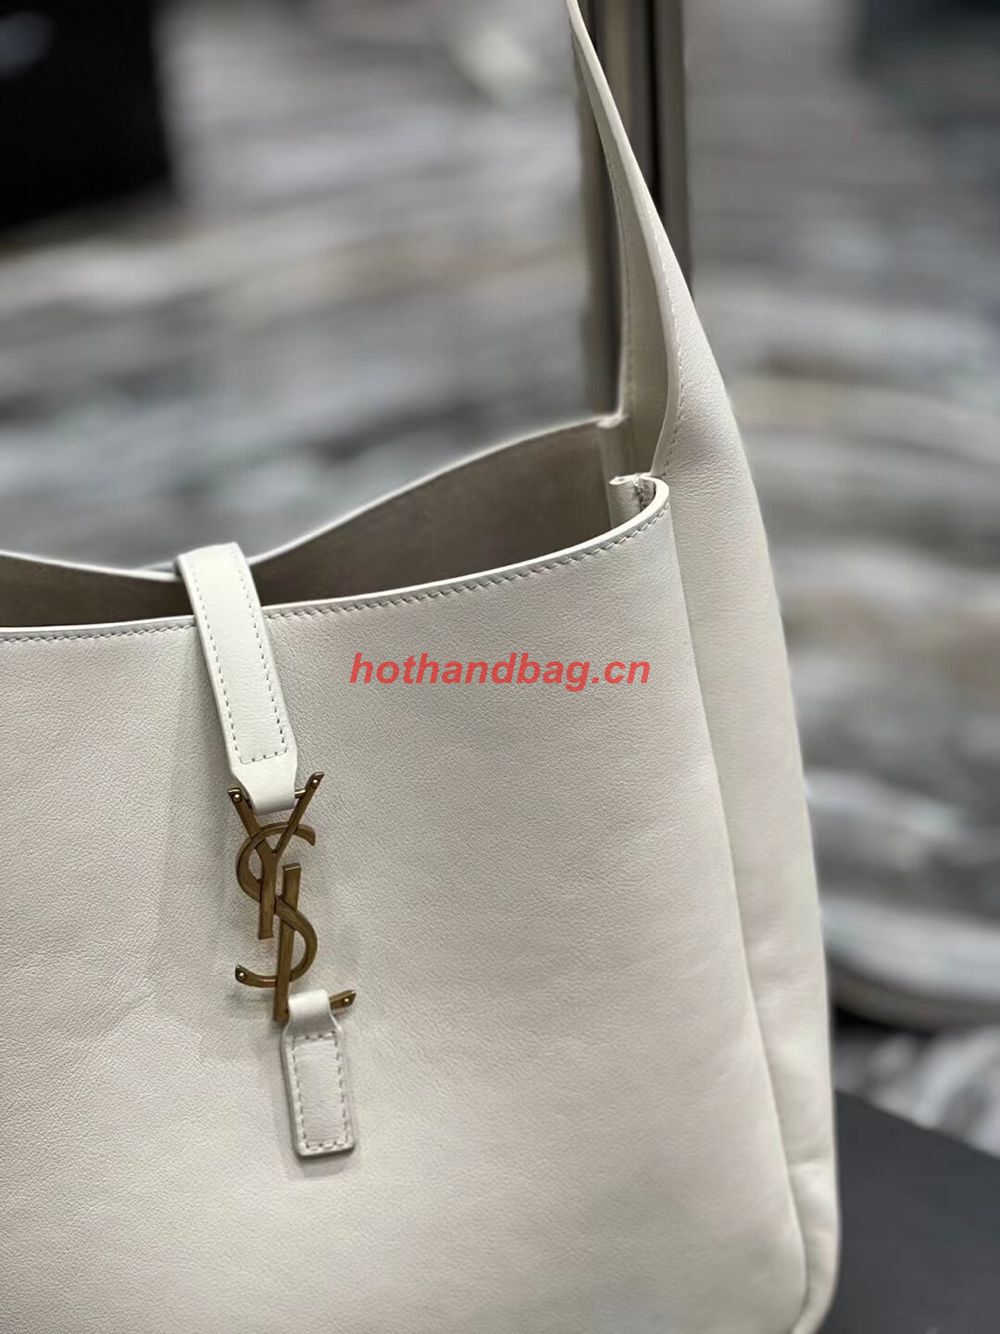 SAINT LAUREN LE 5 A 7 SOFT SMALL HOBO BAG IN SMOOTH LEATHER 713938 white